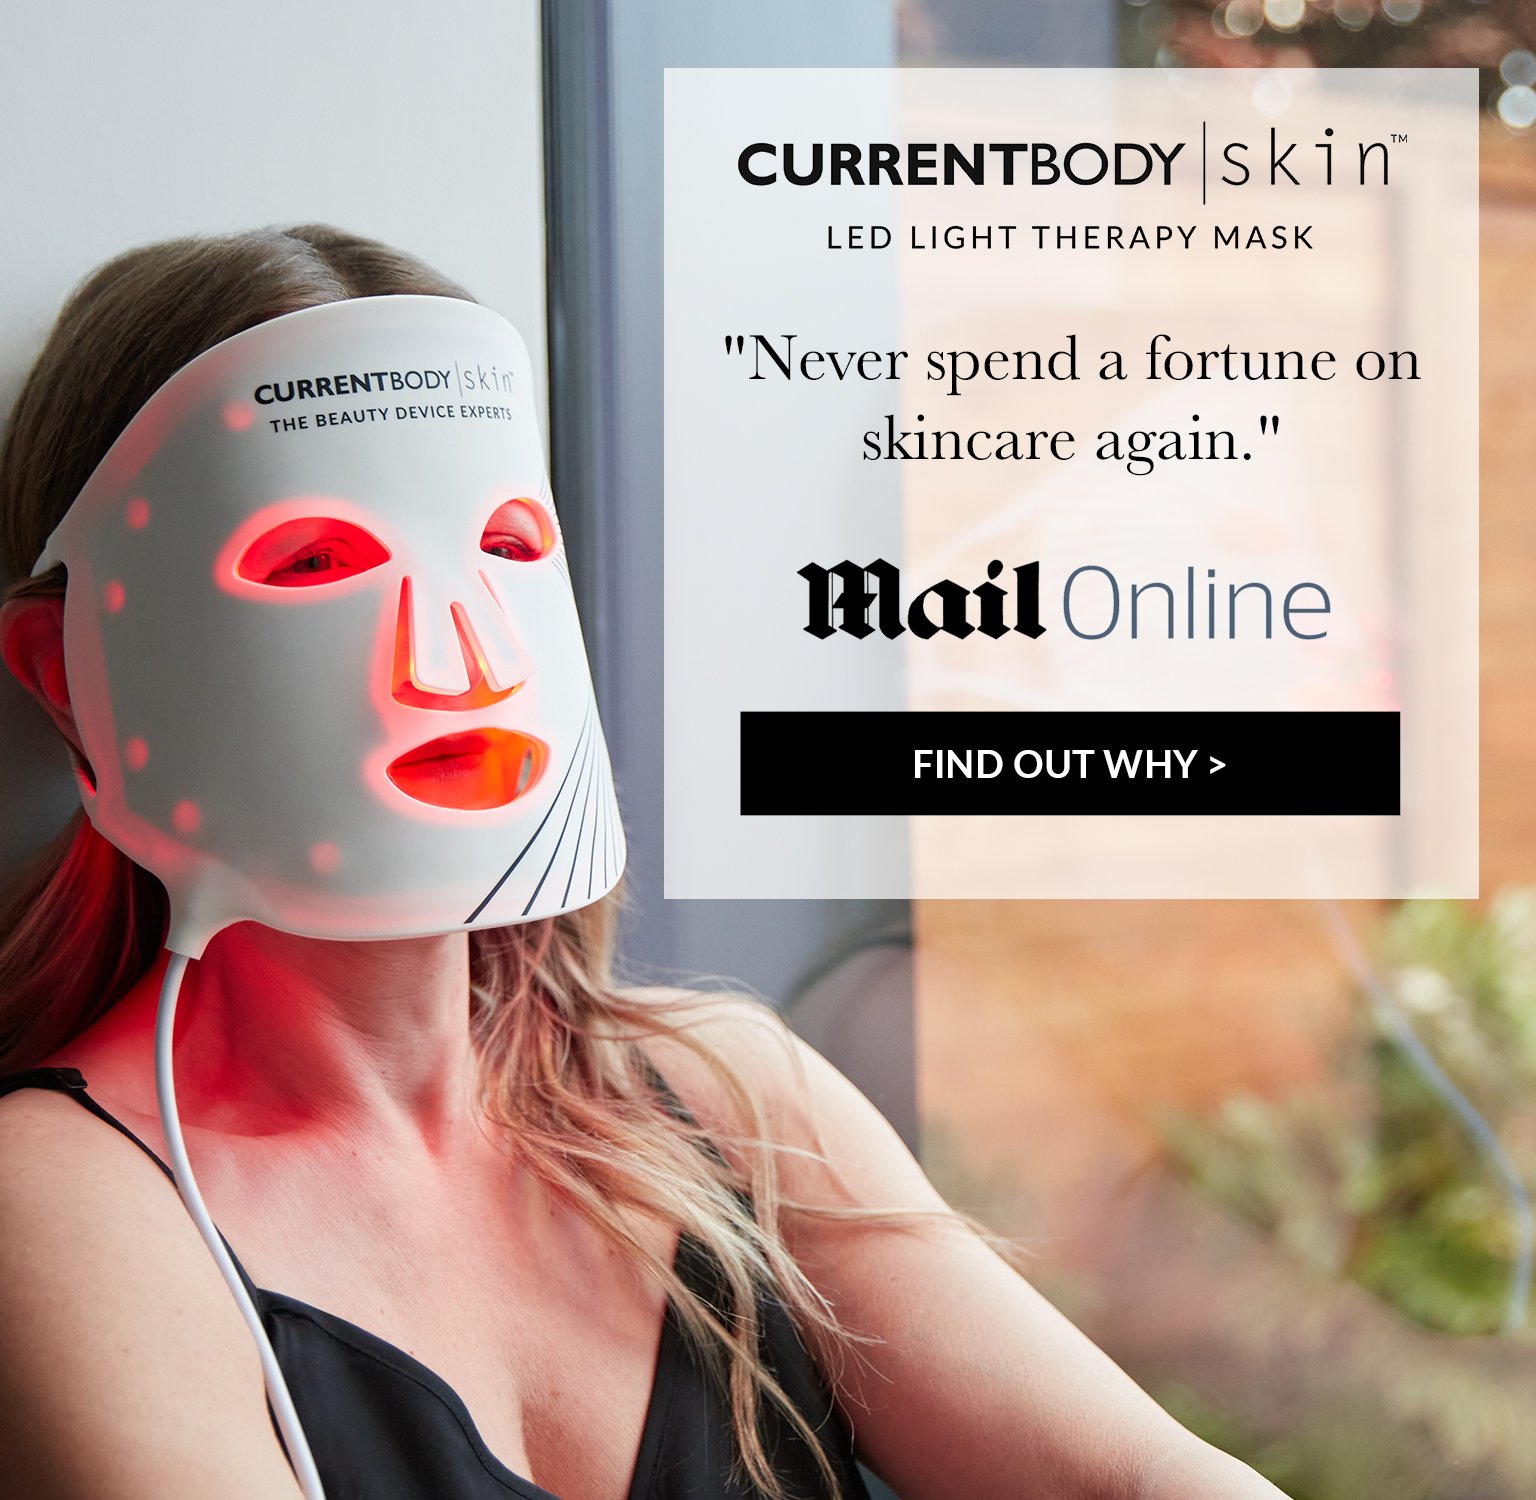 Currentbody AU: Never spend a fortune again with the CurrentBody